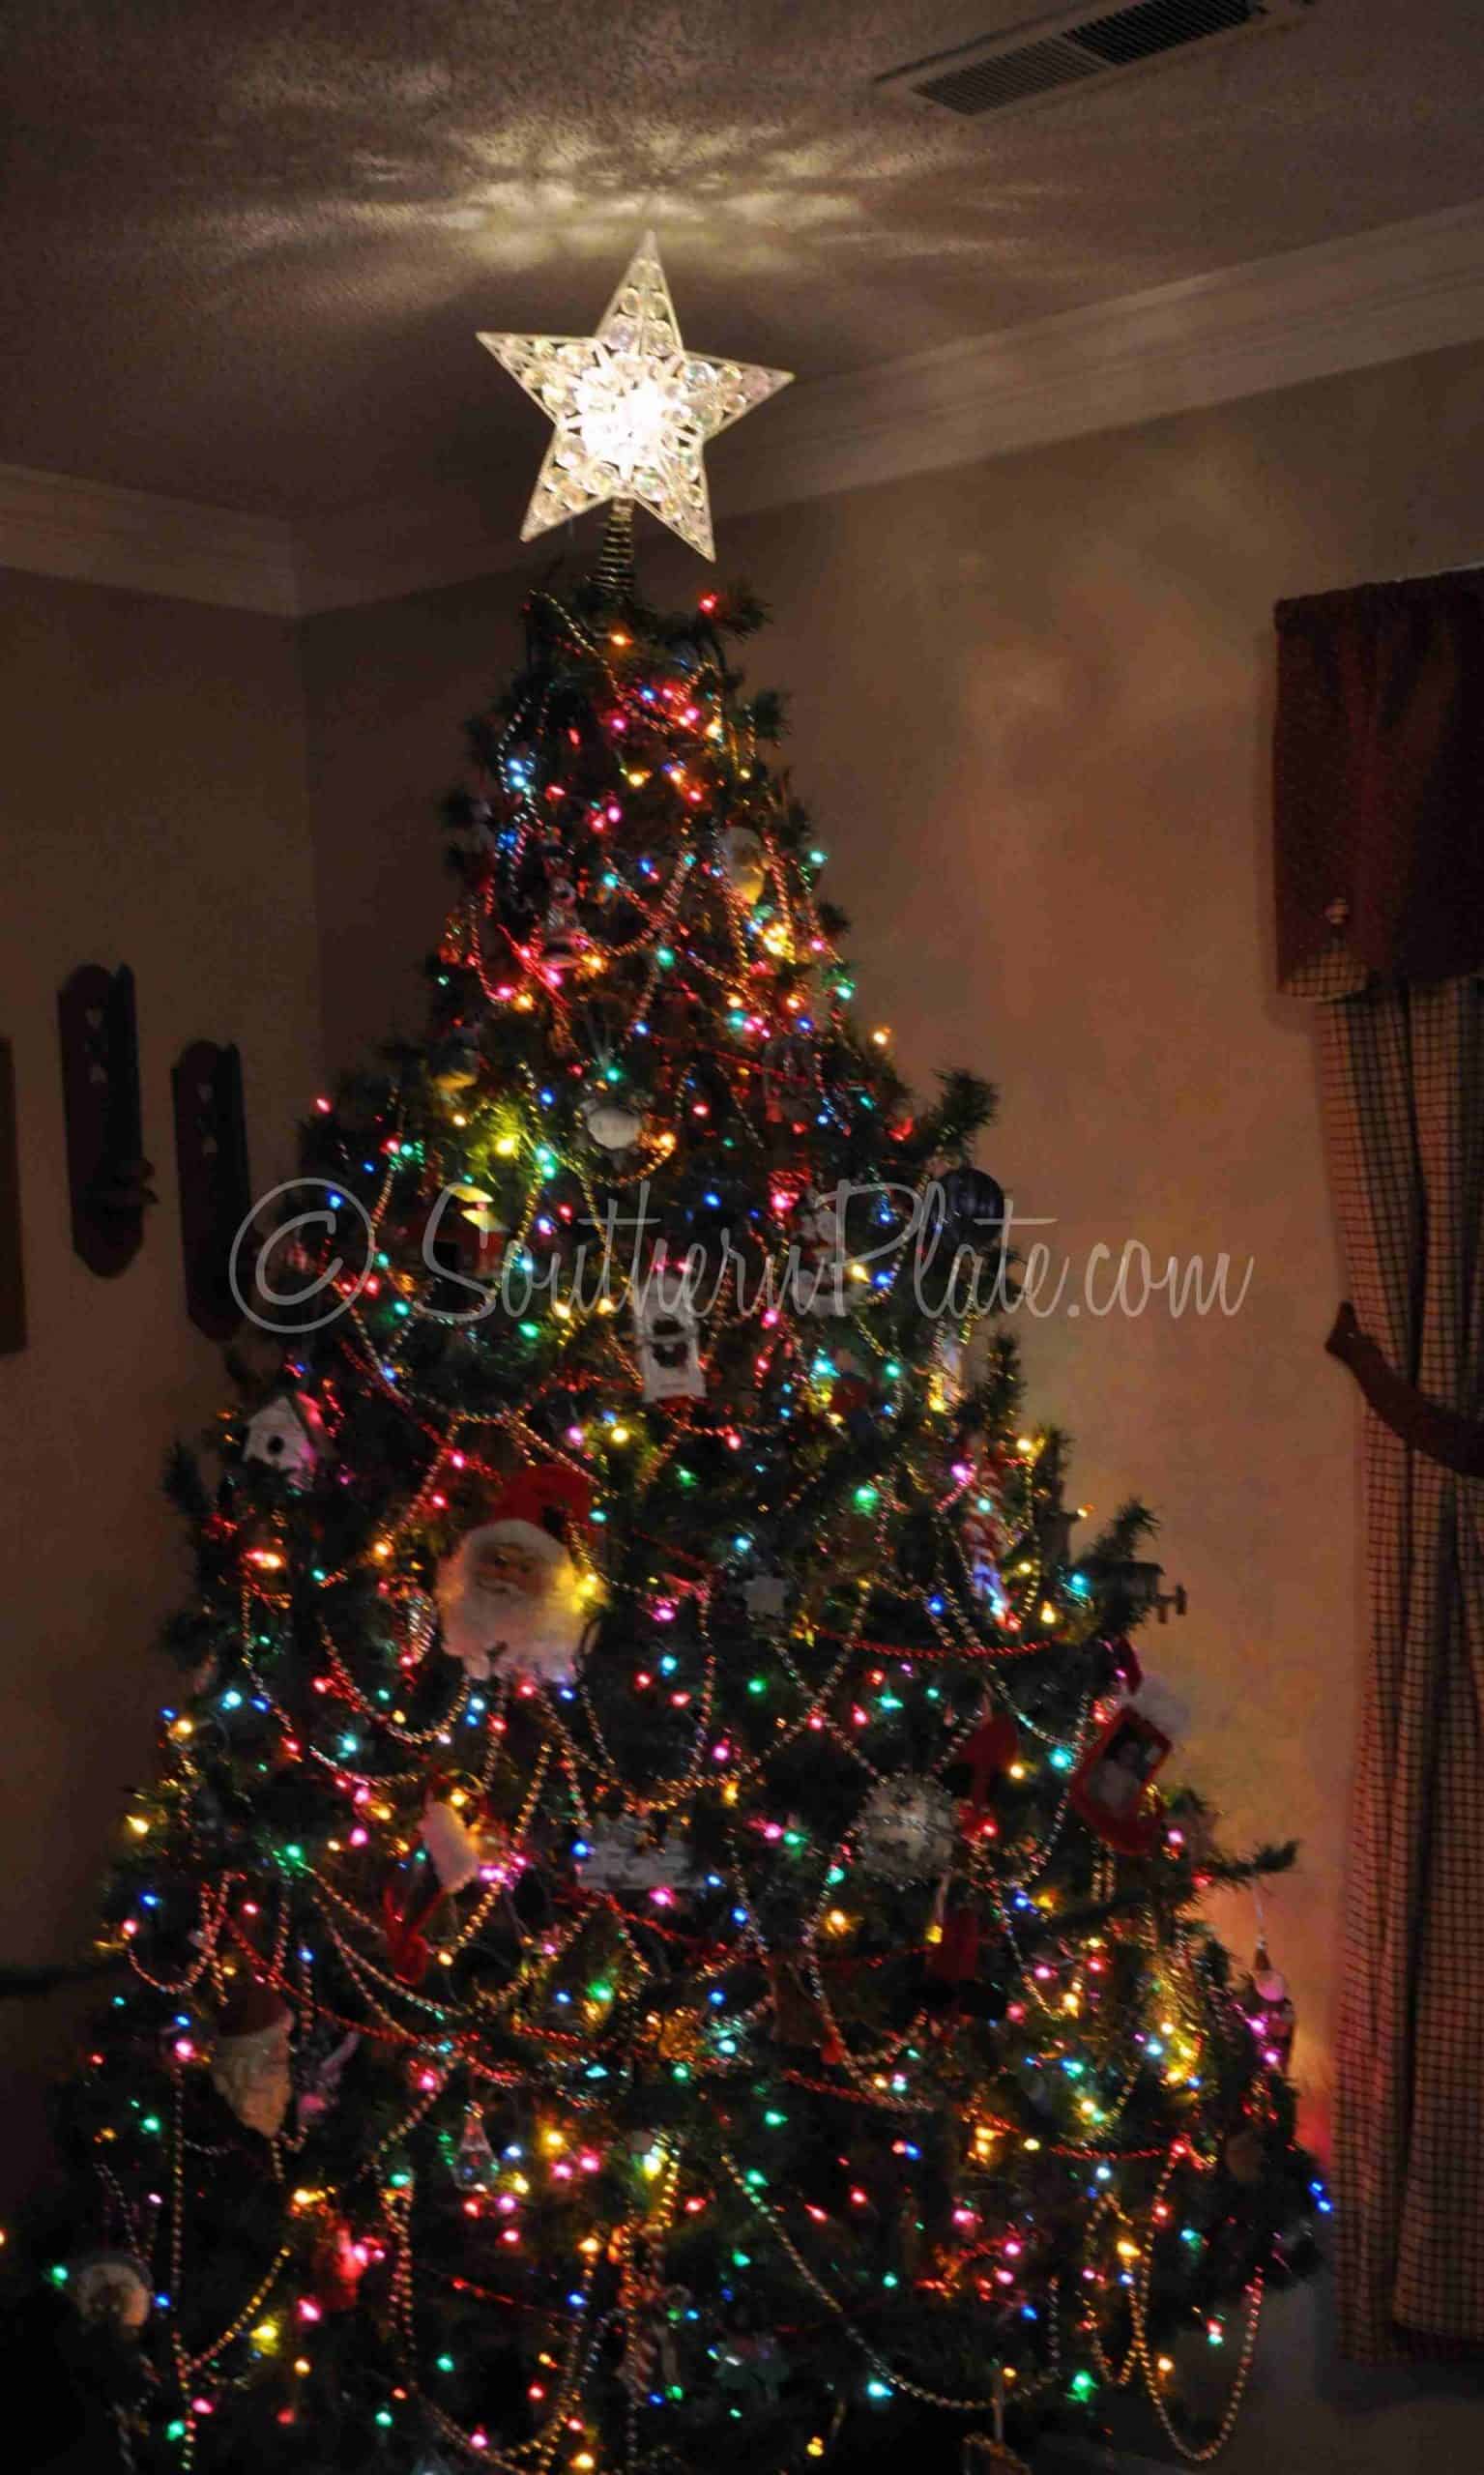 Quickie Look at my Christmas Tree :)